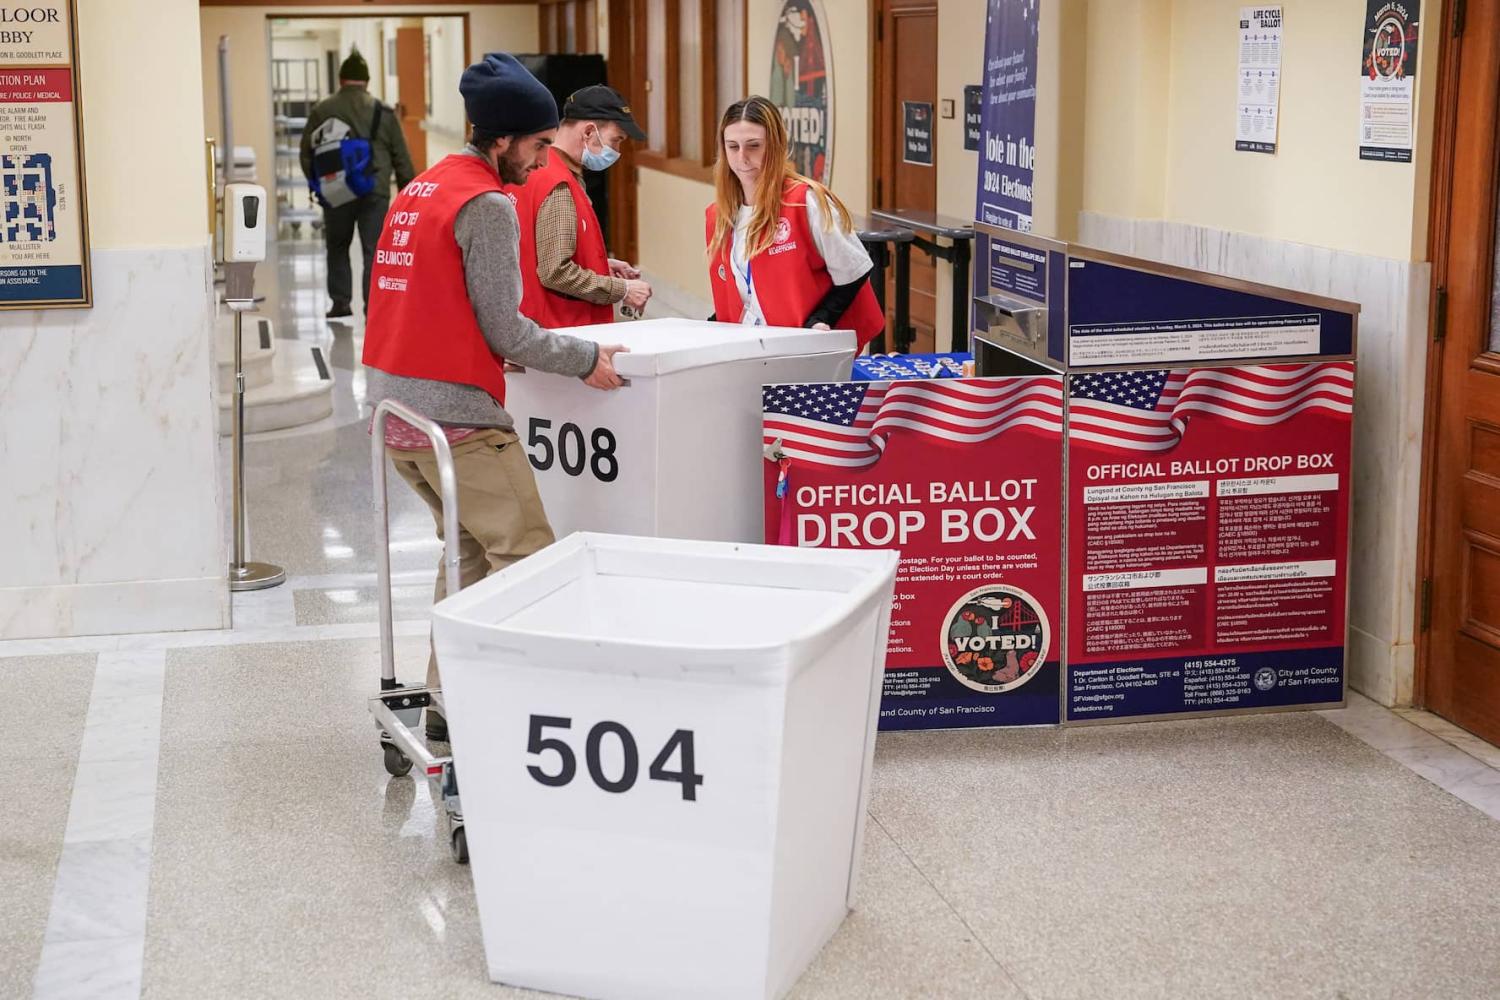 Department of Elections workers transport a box of ballots at the San Francisco City Hall voting center during the Super Tuesday primary election in San Francisco, California, U.S. March 5, 2024. Department of Elections workers transport a box of ballots at the San Francisco City Hall voting center during the Super Tuesday primary election in San Francisco, California, U.S. March 5, 2024.